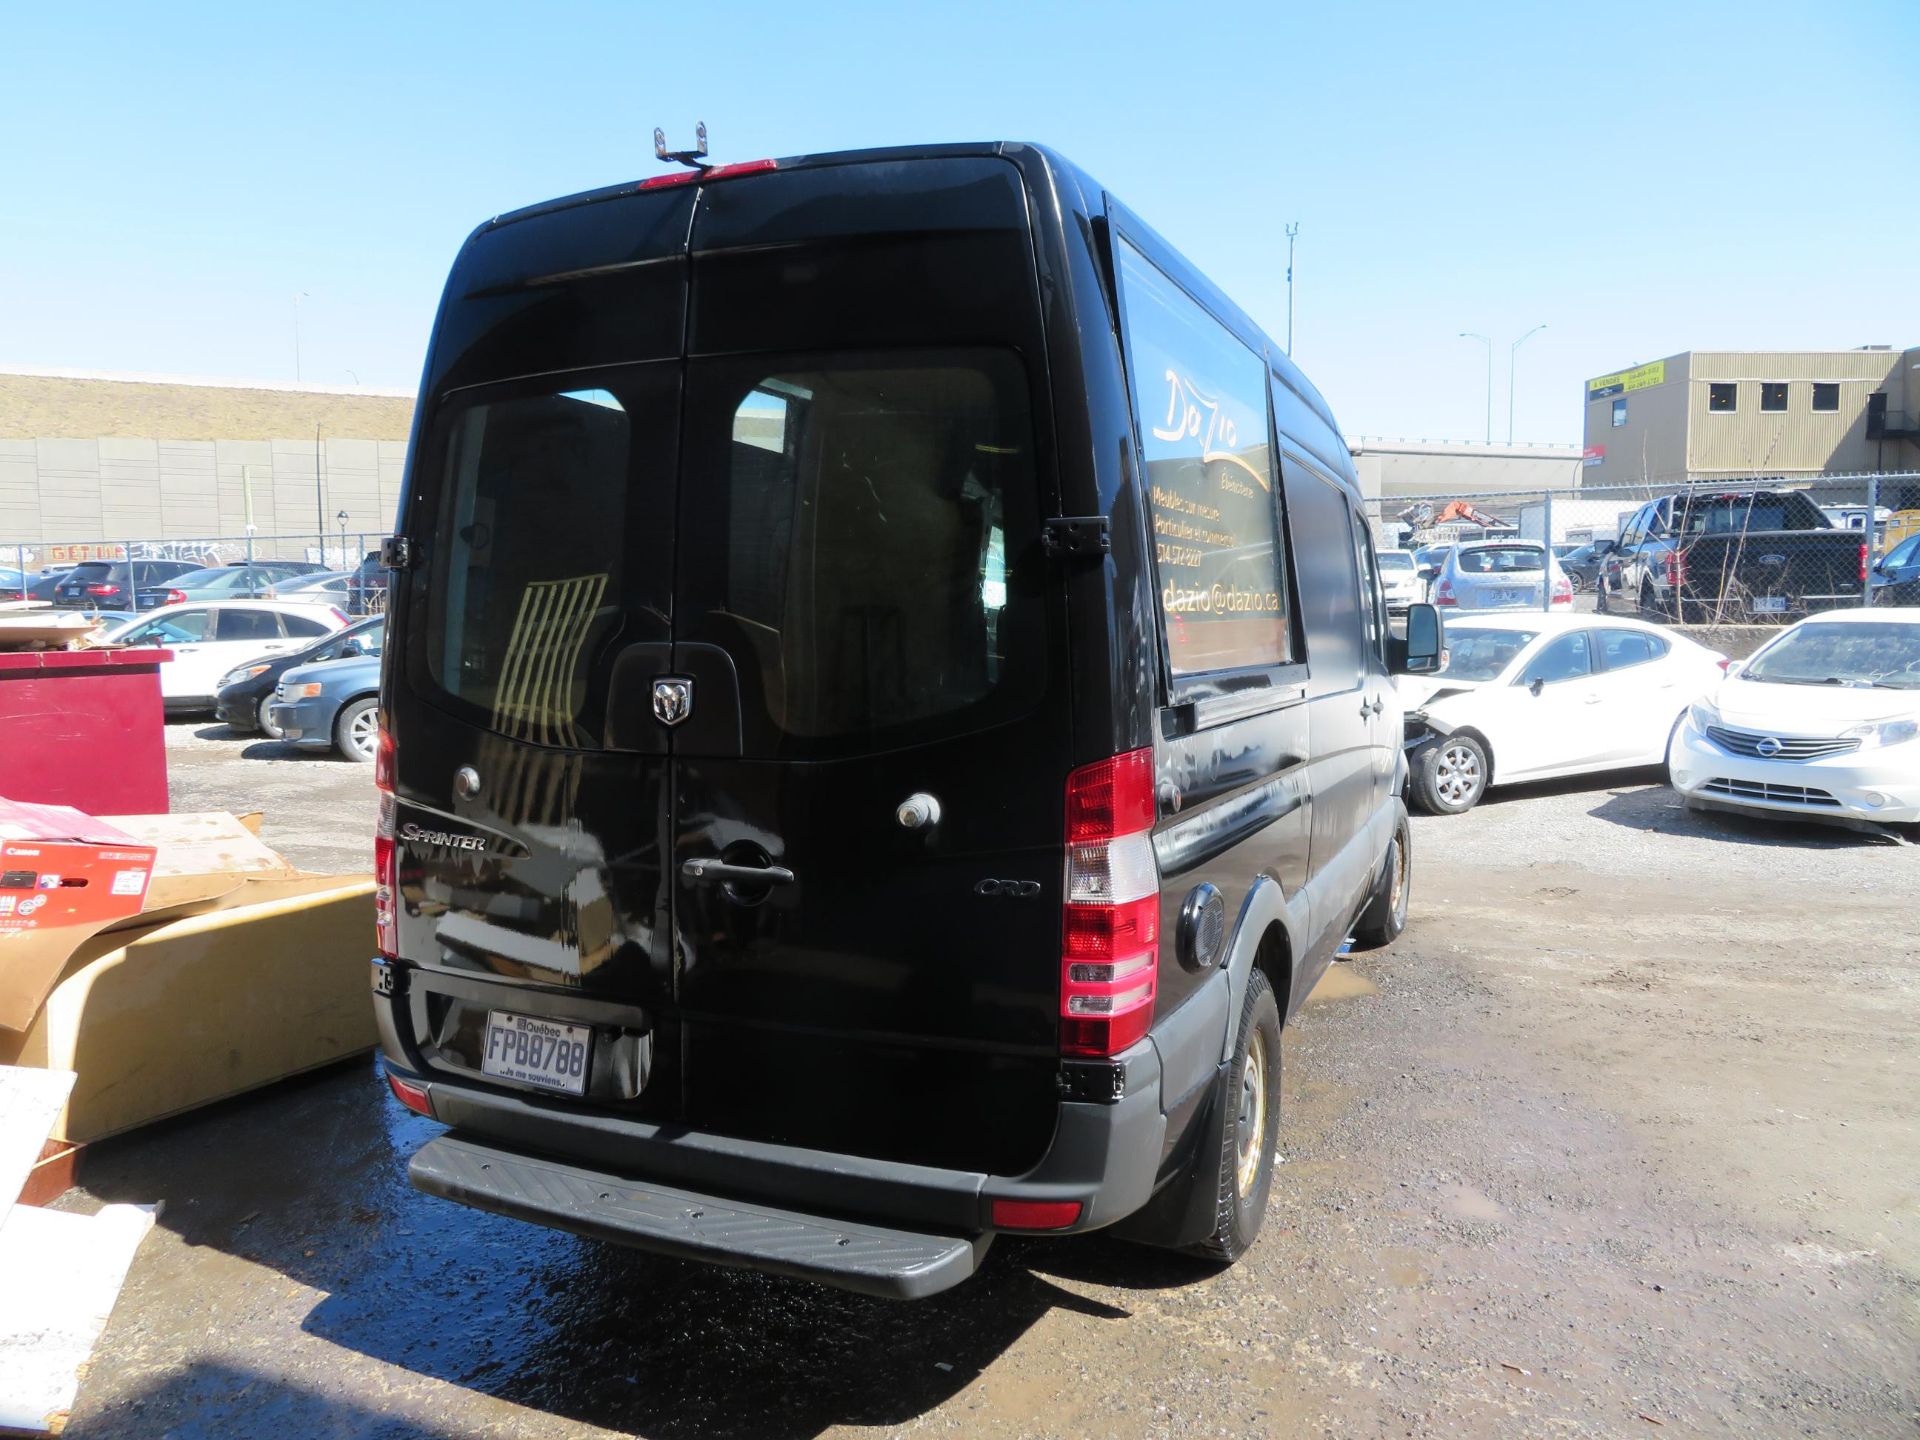 DODGE Sprinter 2007 CRD, 170 000 KM, Diesel, 3.0 L, Automatic, 18ft long, air (walk-in) VIN: - Image 2 of 8